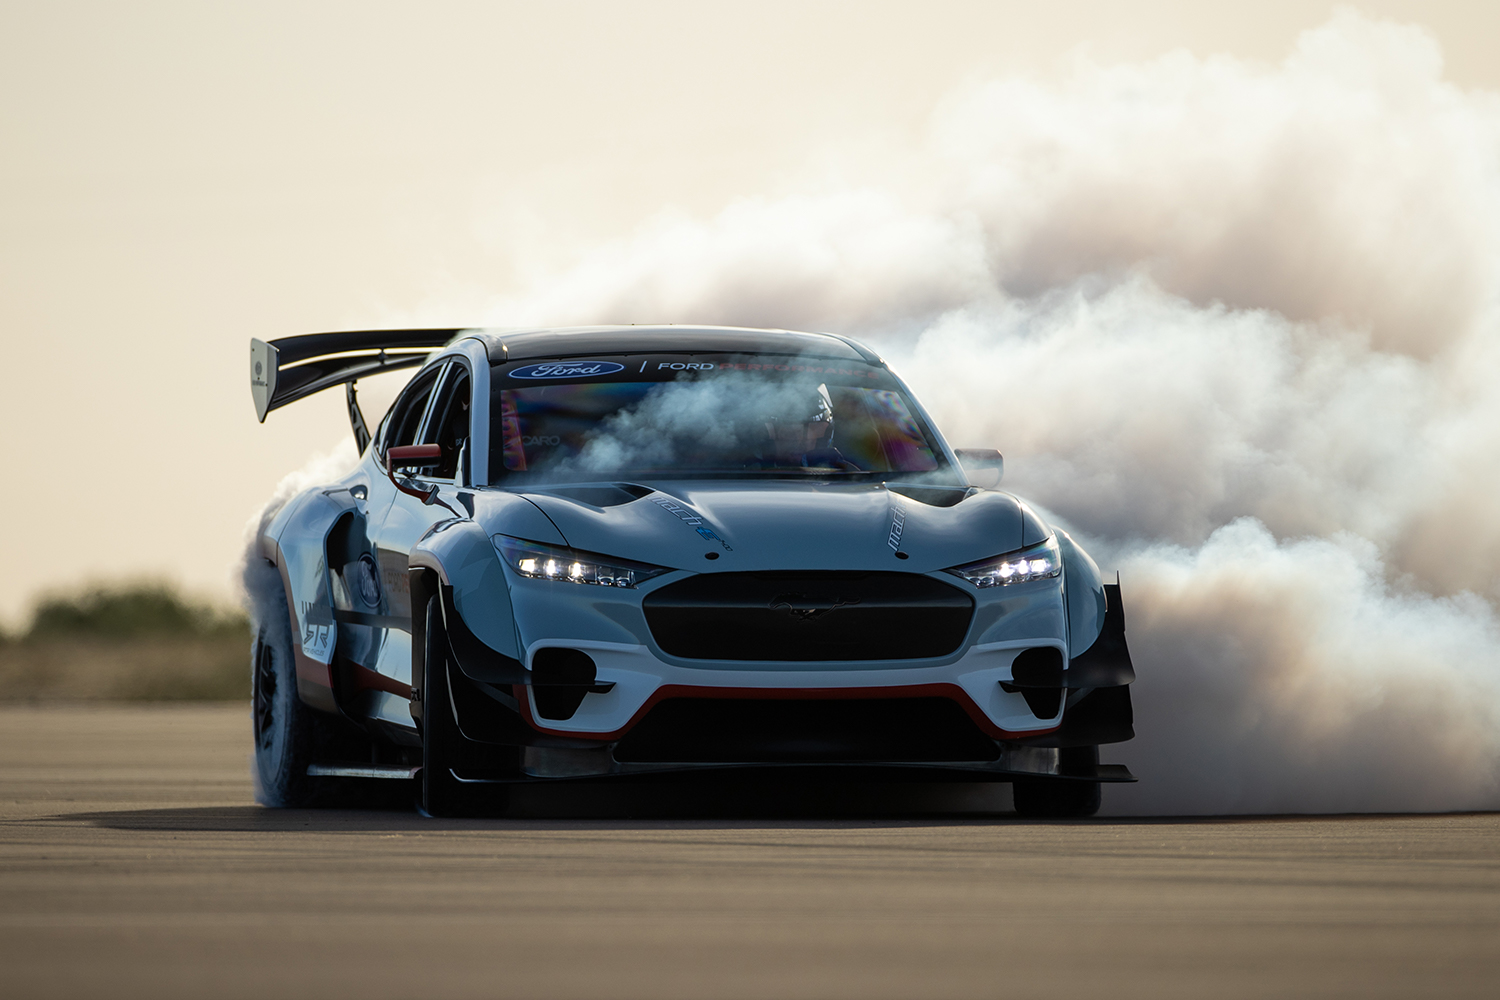 The one-off Ford Mustang Mach-E 1400 electric prototype drifting